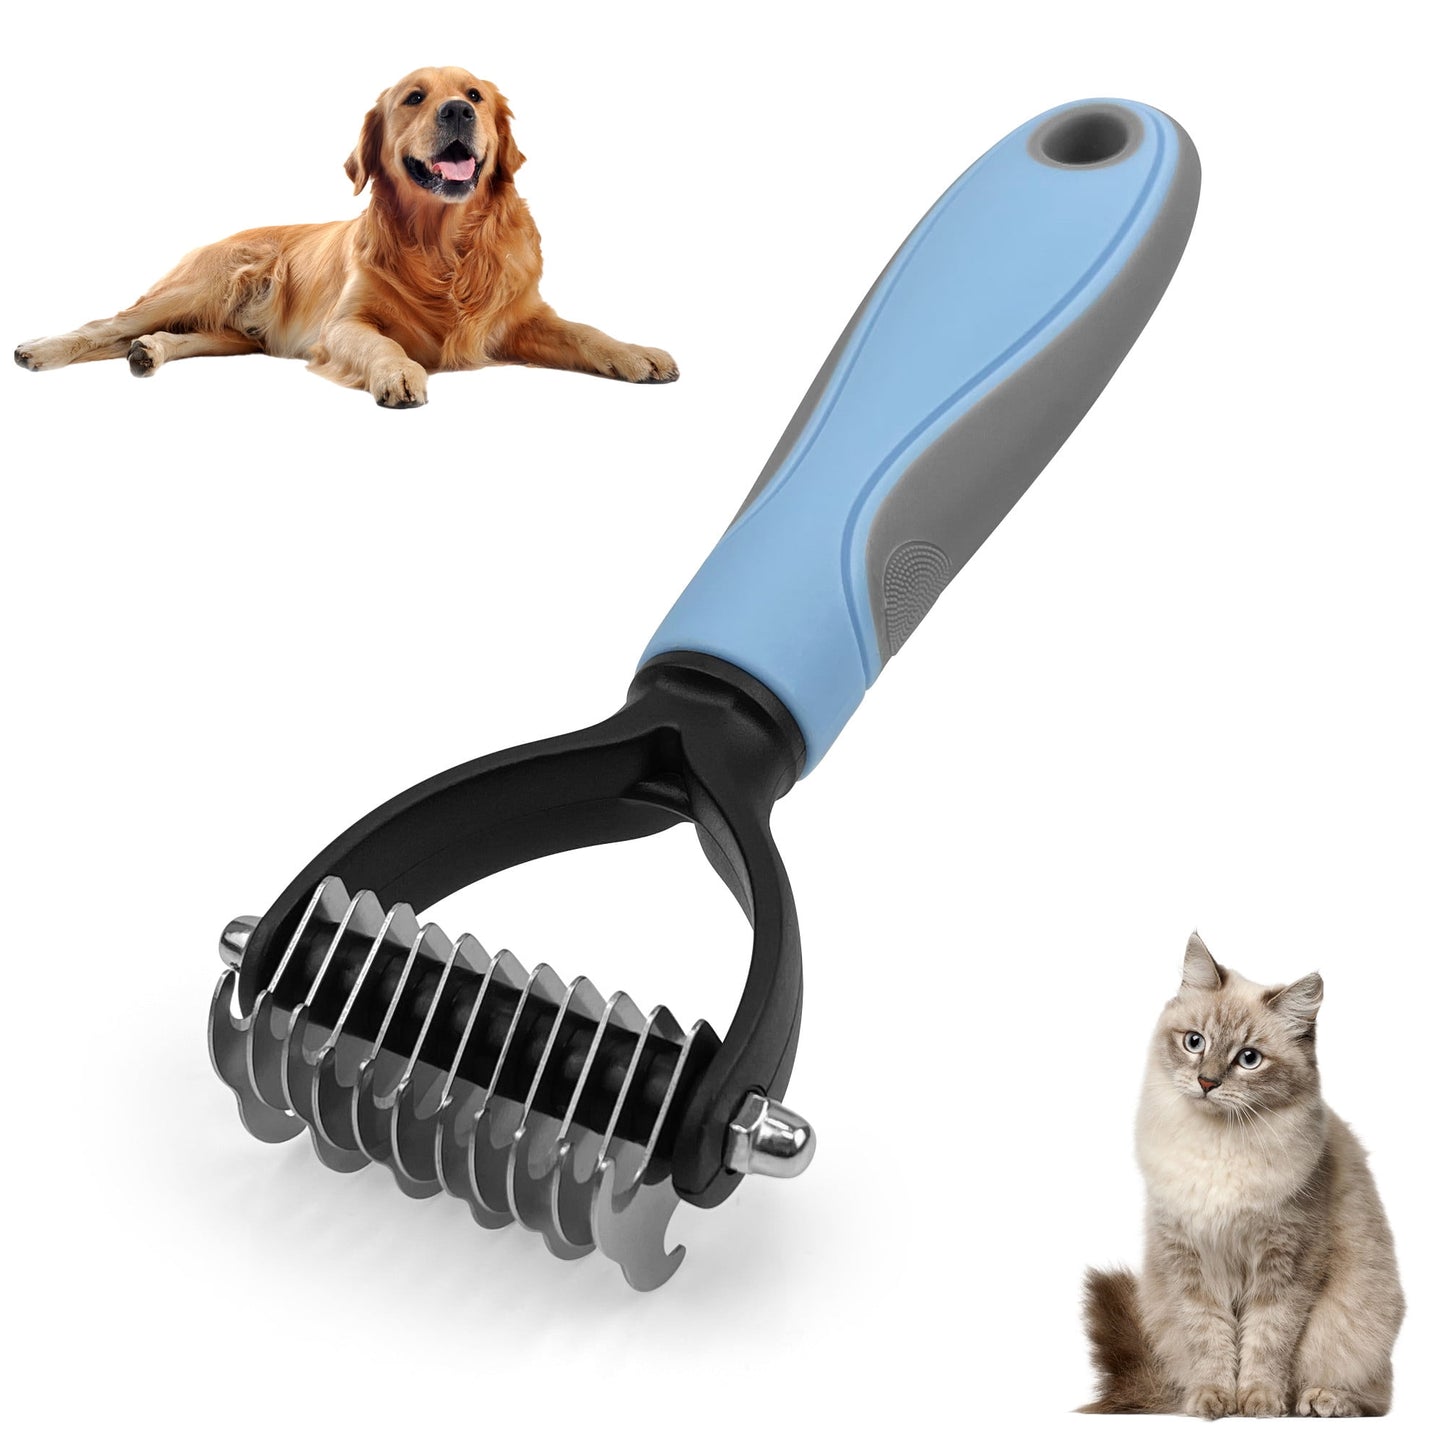 Pet Cleaning Brush, Large Medium Small Sensitive Long or Short Hair Cats Dogs Brush for Shedding and Grooming, Removes Tangled Hair